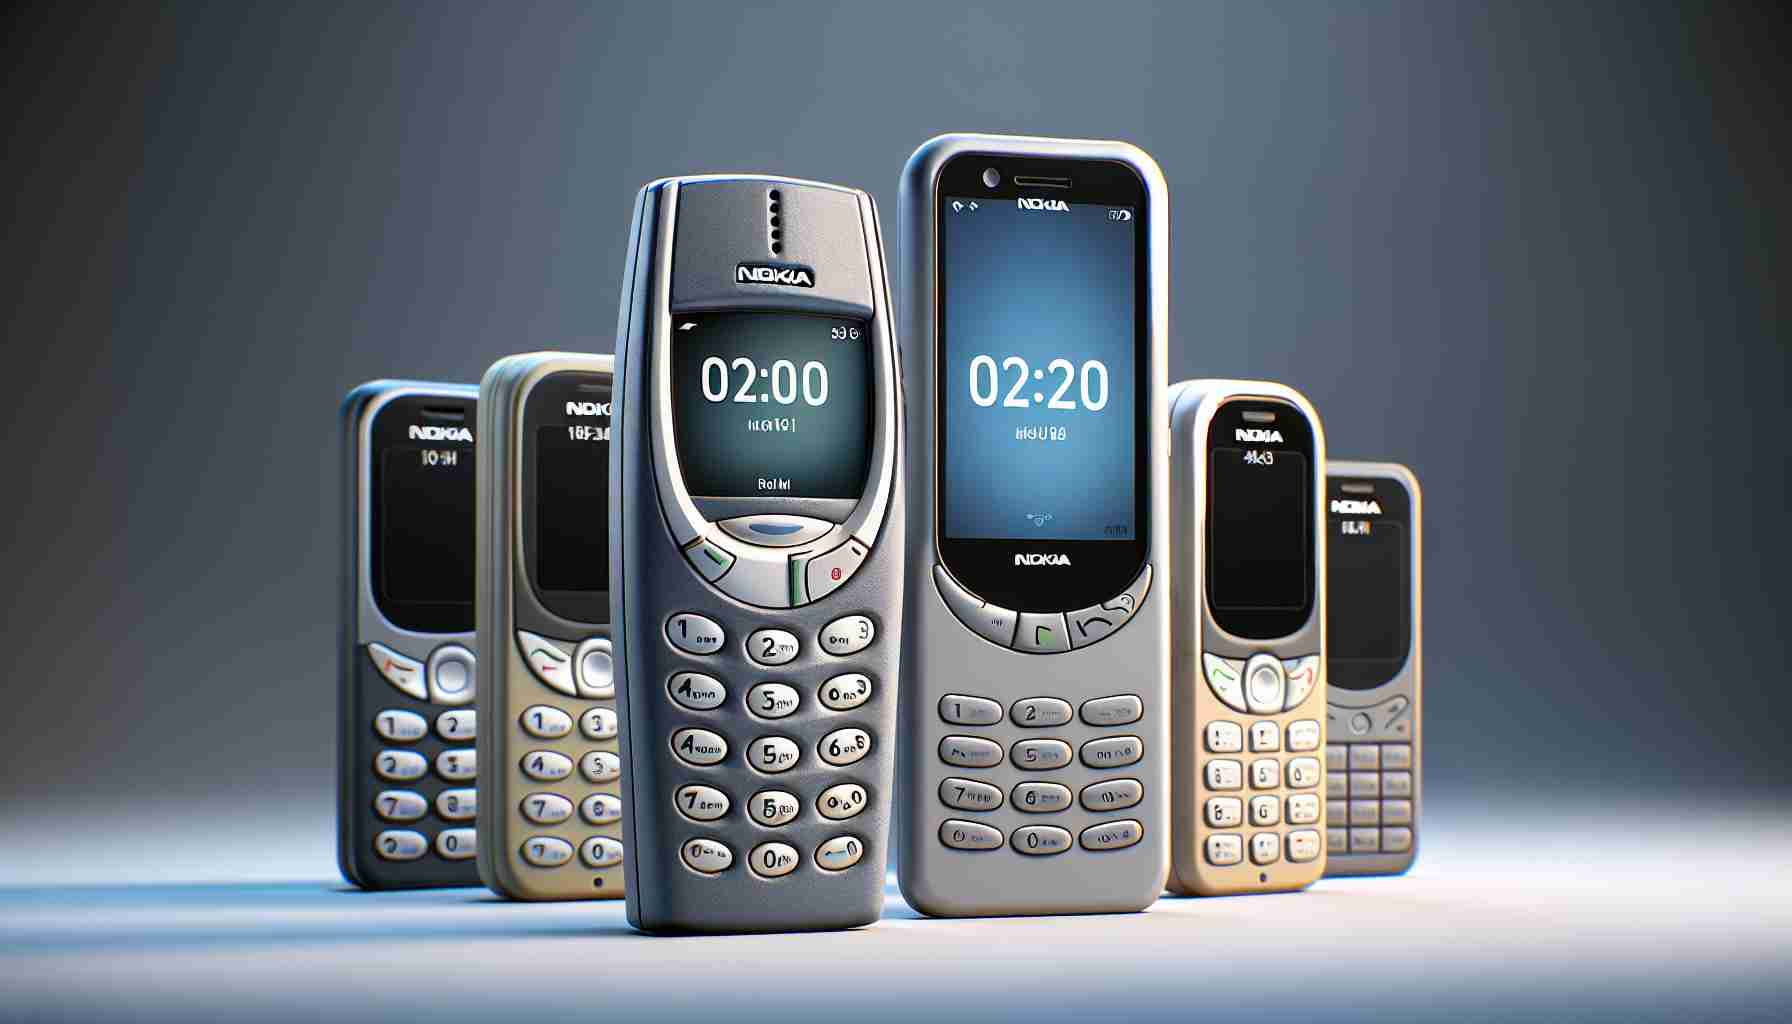 Nokia 3210 Relaunched